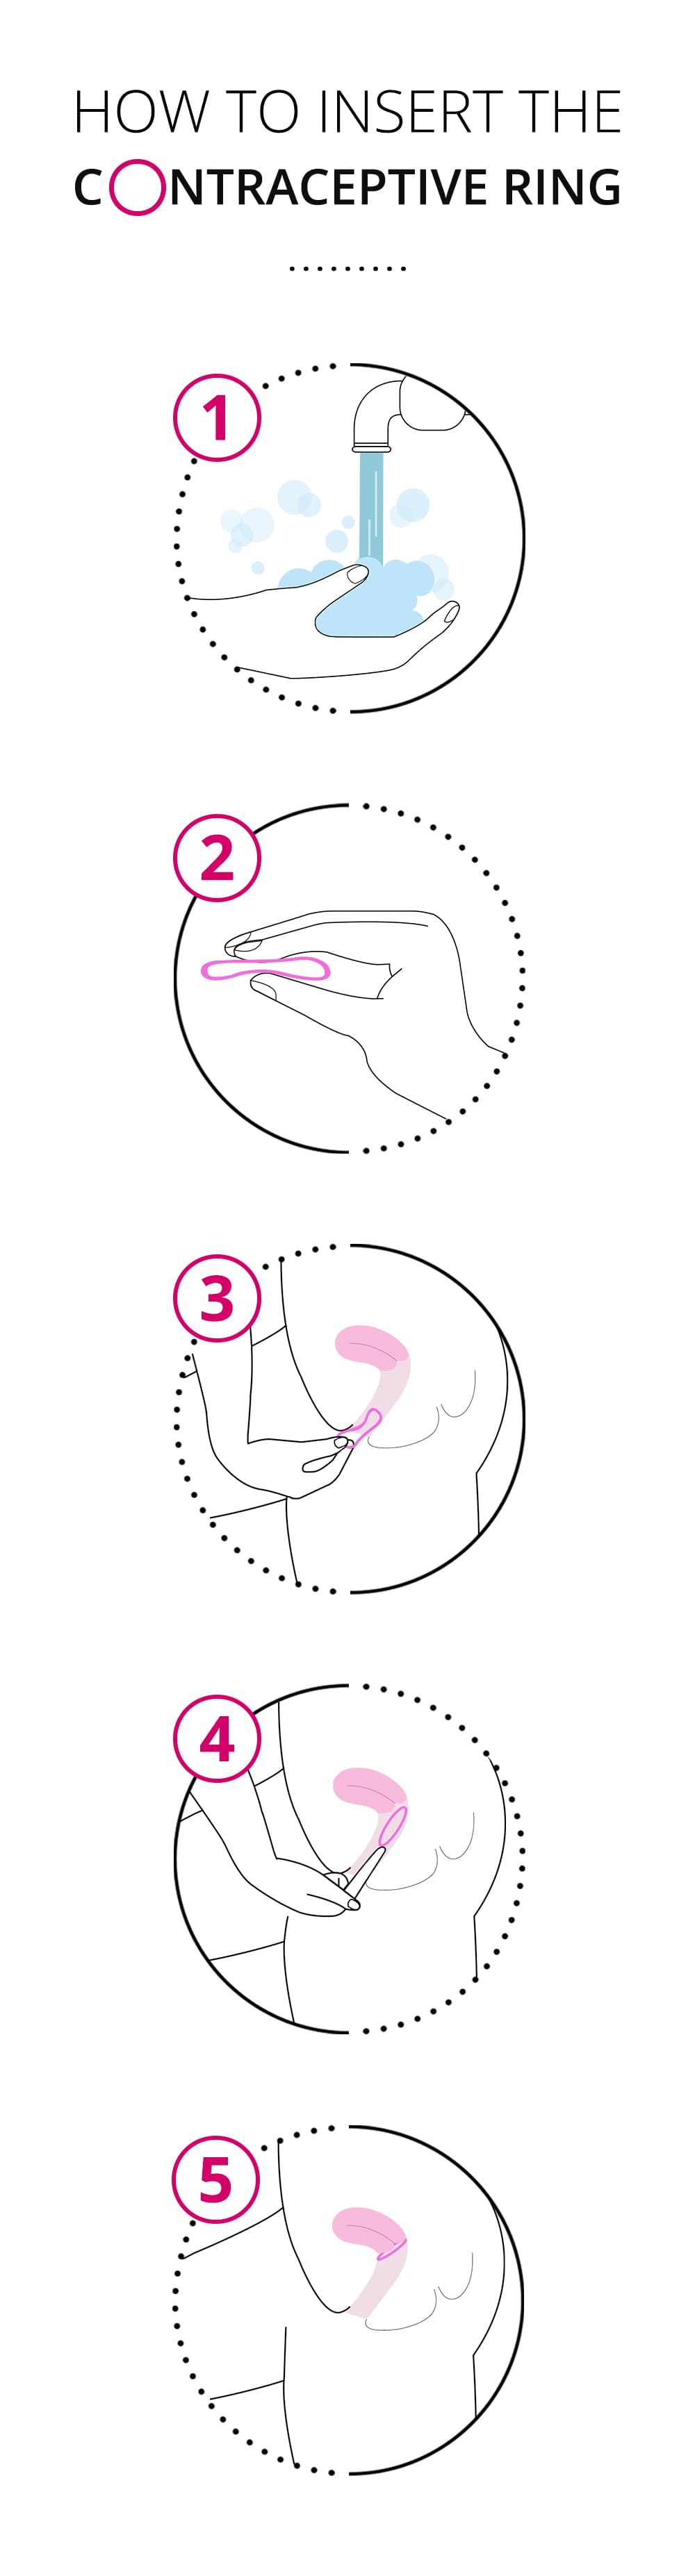 How to insert the contraceptive ring